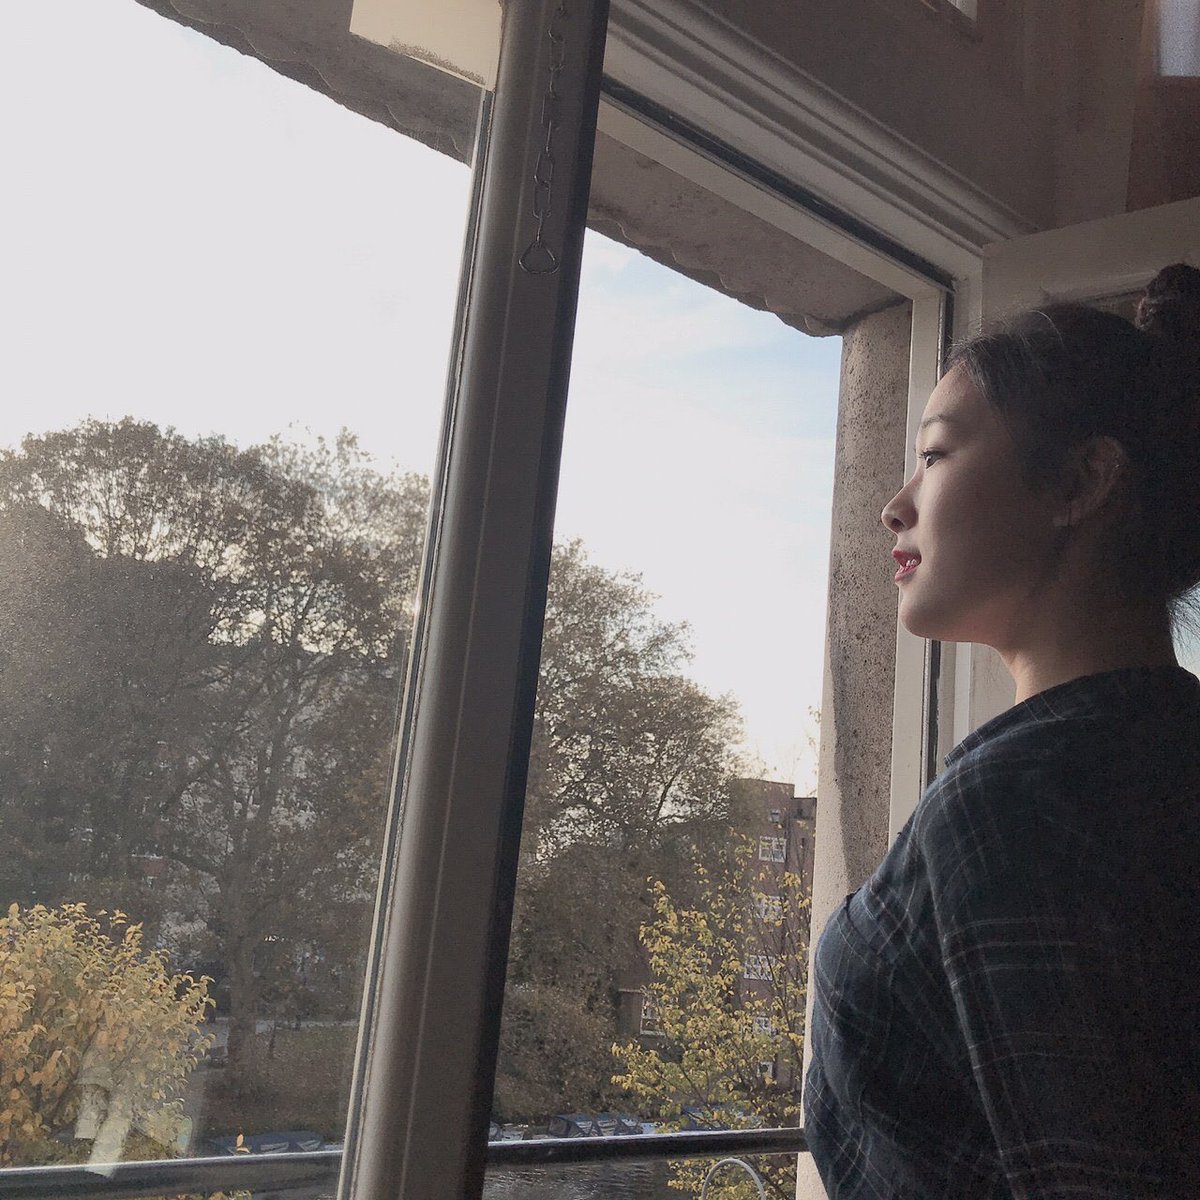 that “looking out of the window pensively” aesthetic